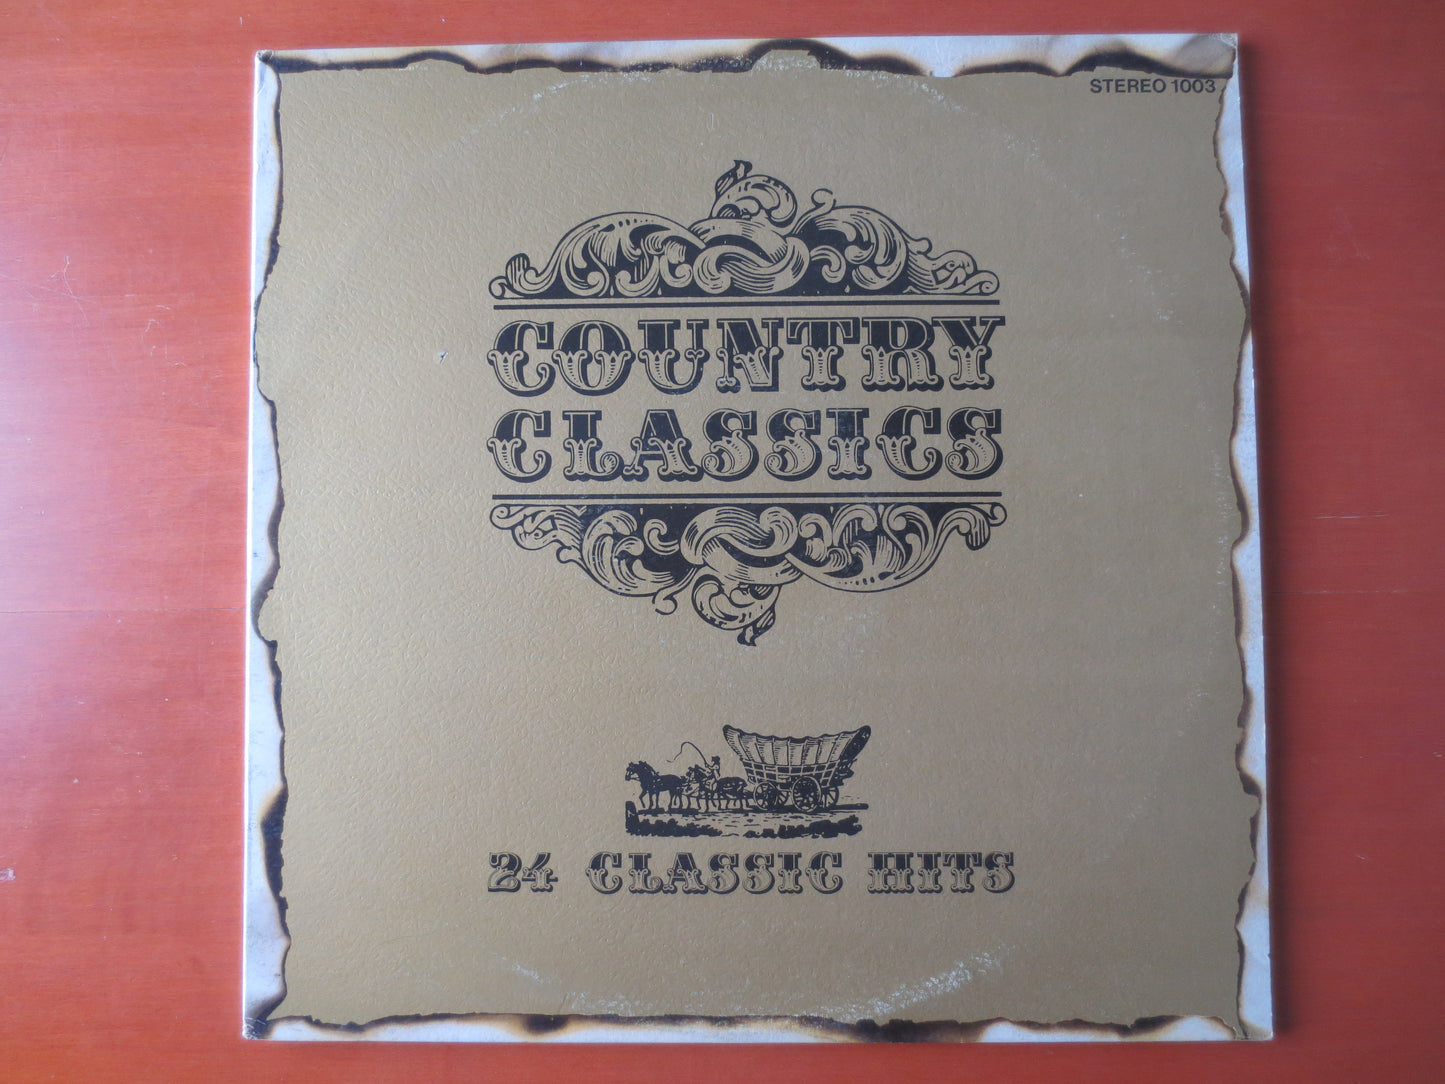 COUNTRY CLASSICS, 24 CLASSIC Hits, Country Albums, Country Music, Country Records, Vinyl Album, Vinyl Record, Folk Records